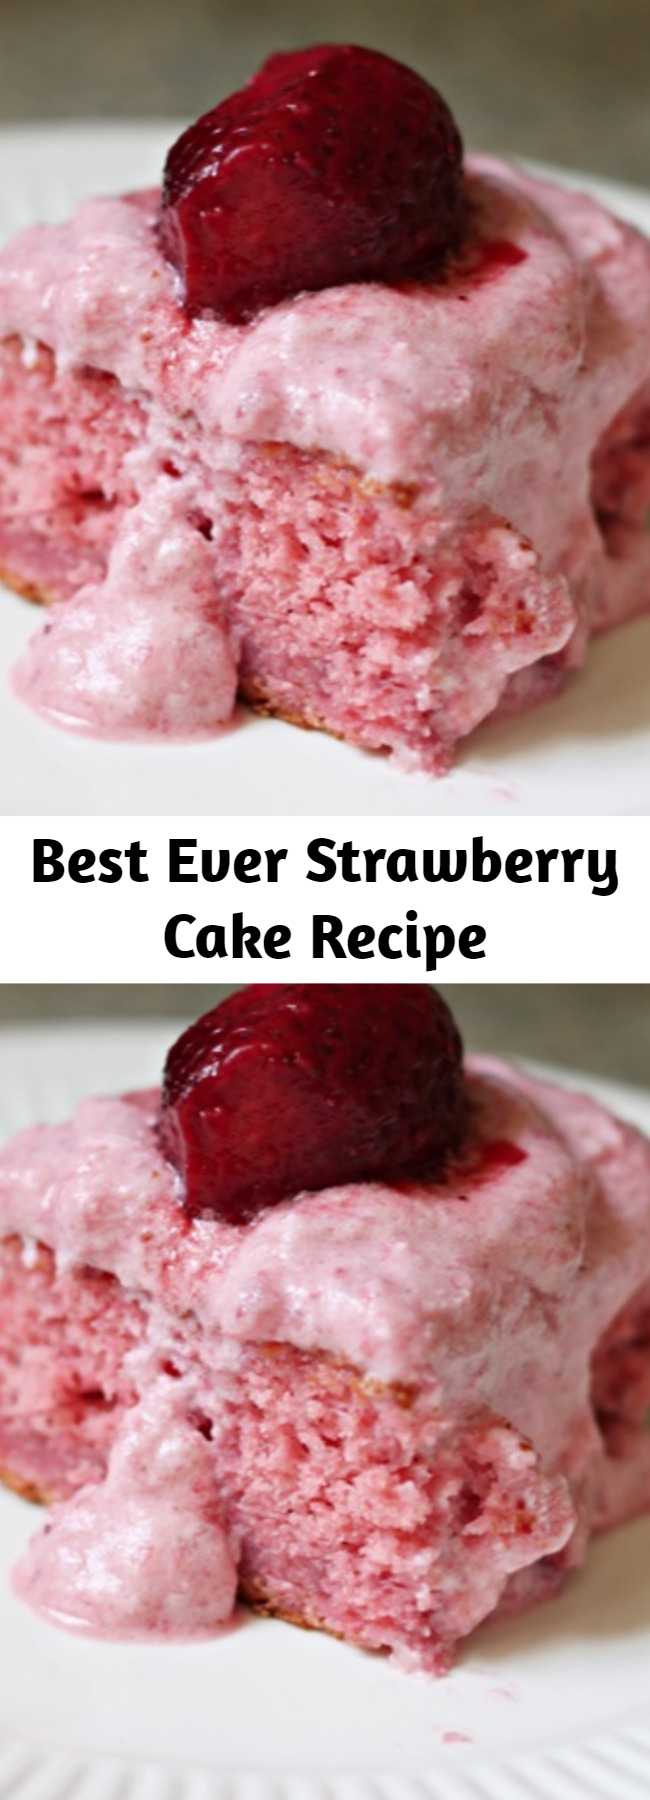 Best Ever Strawberry Cake Recipe - Easy strawberry sheet cake made with a box cake mix base, with added ingredients and a cream cheese strawberry icing.